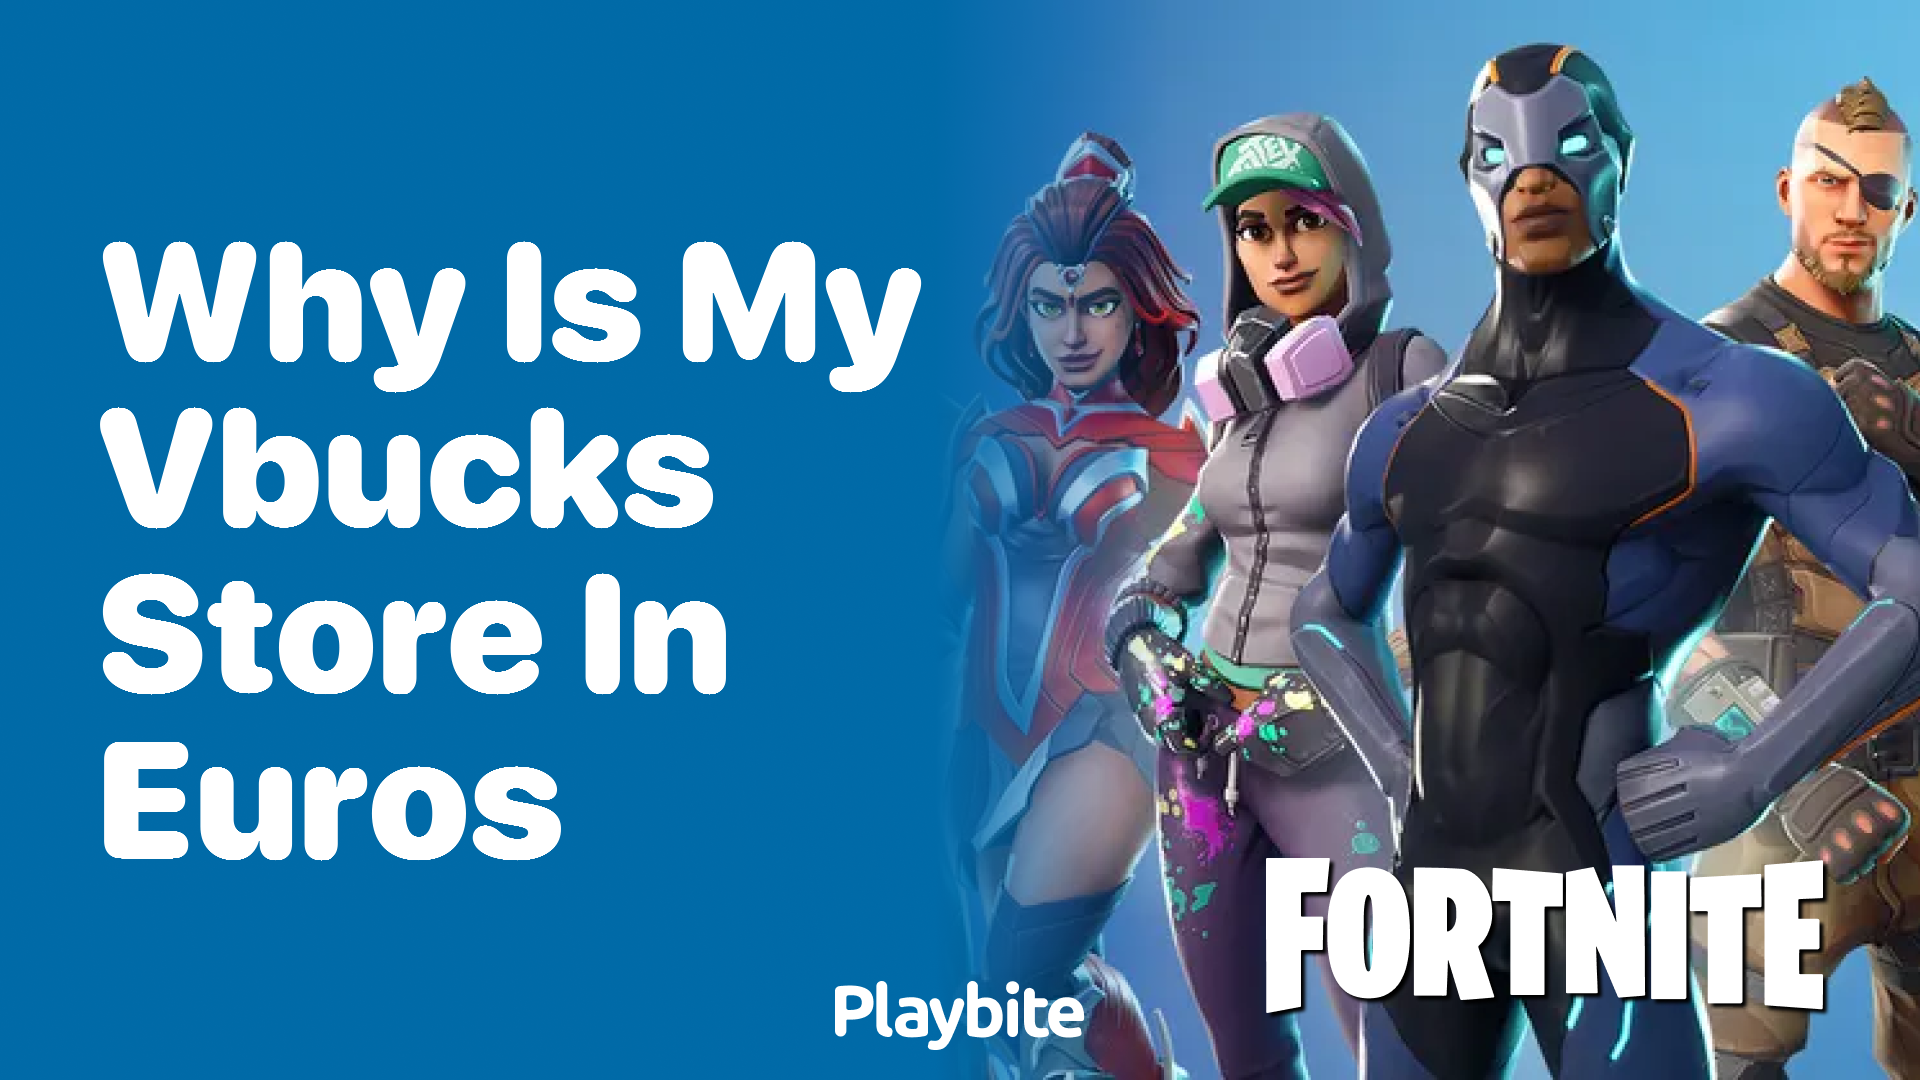 Why is My V-Bucks Store in Euros?